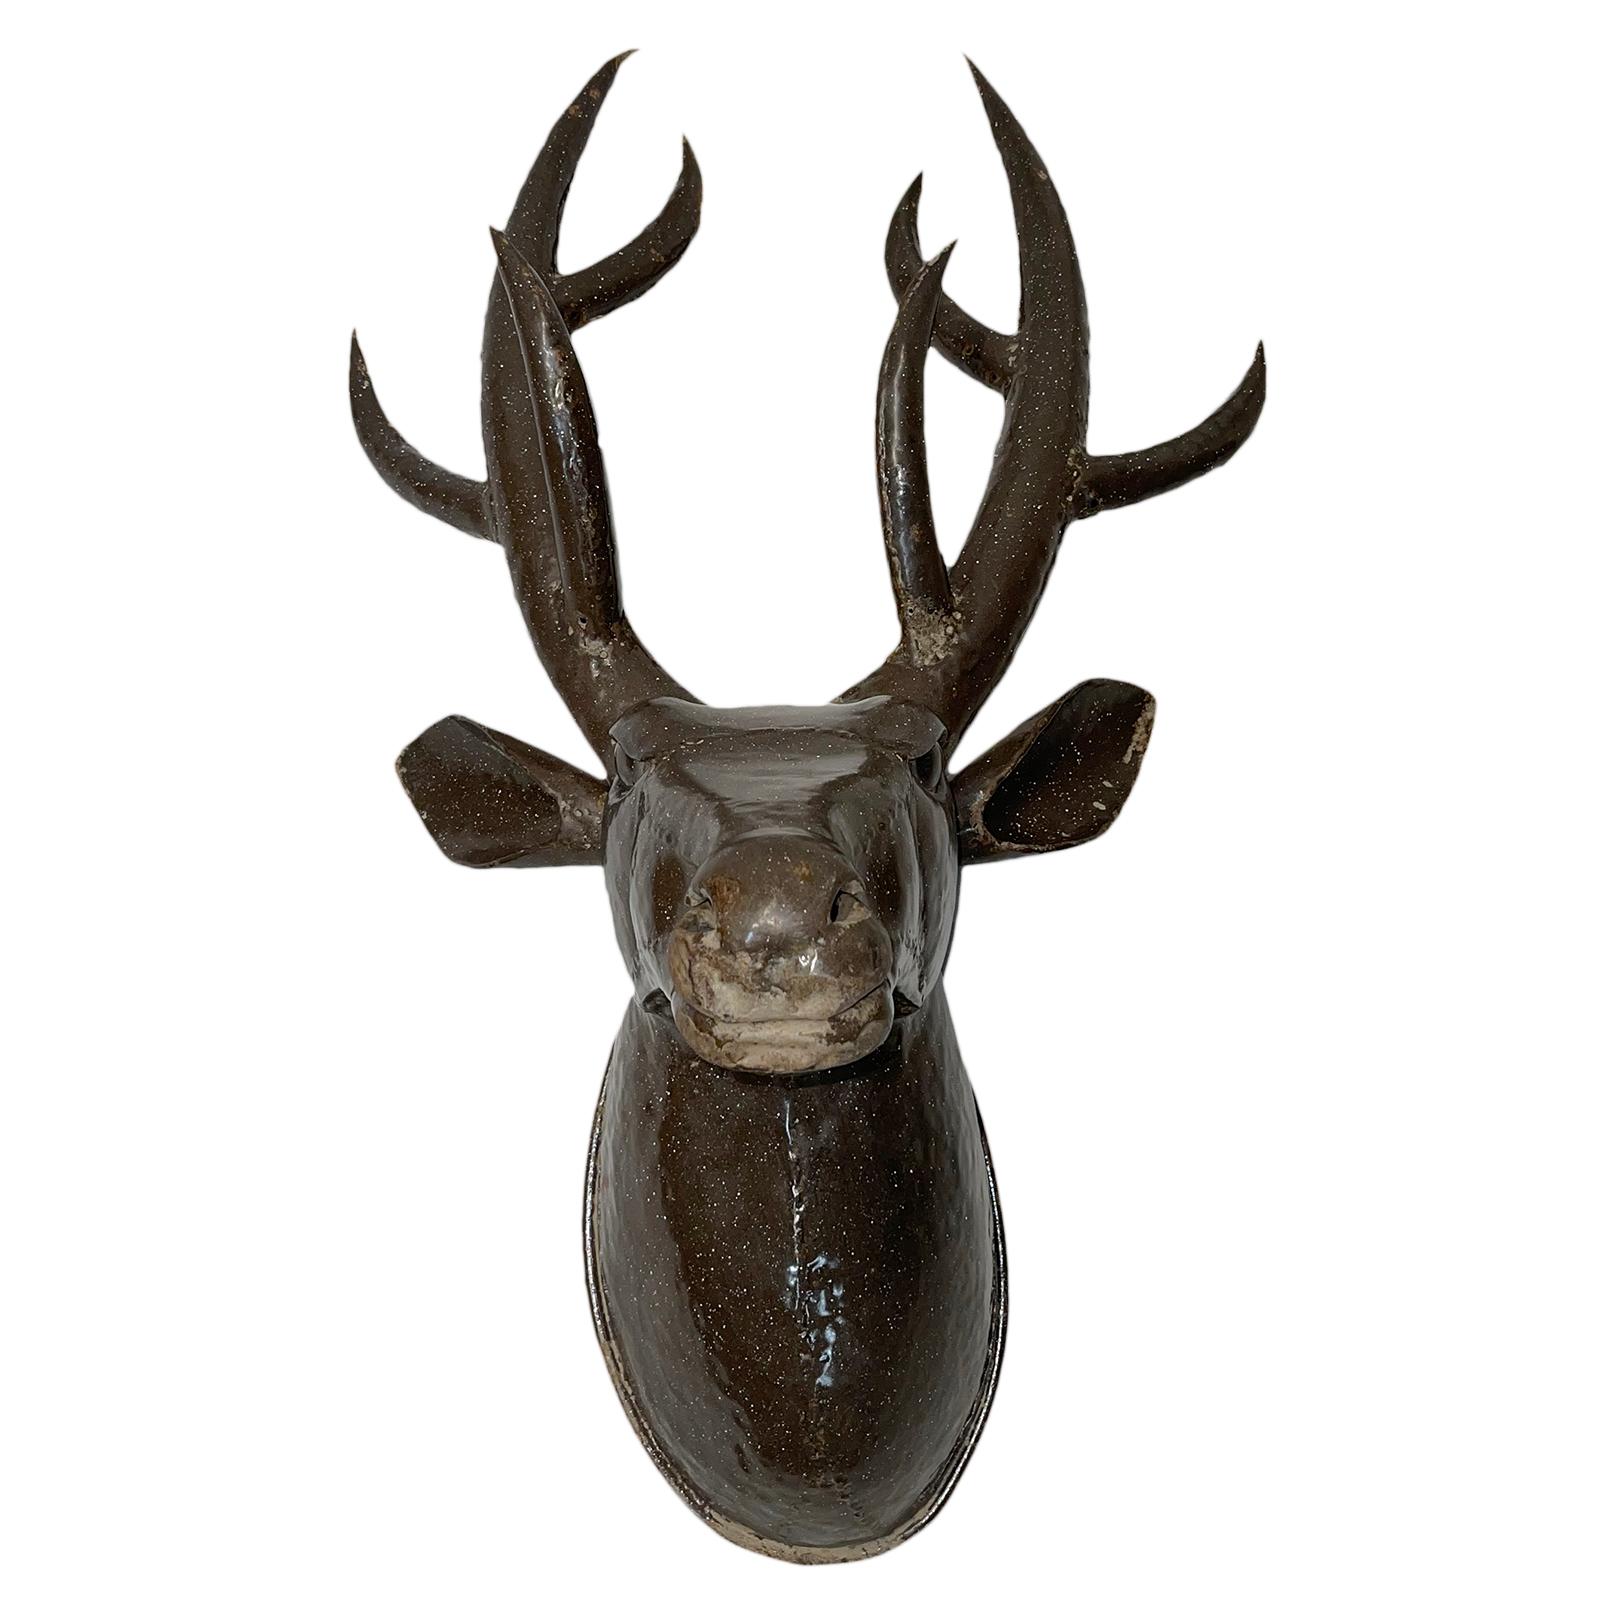 A Danish circa 1960's hand-forged and painted iron stag head wall sculpture.

Measurements:
Height: 37